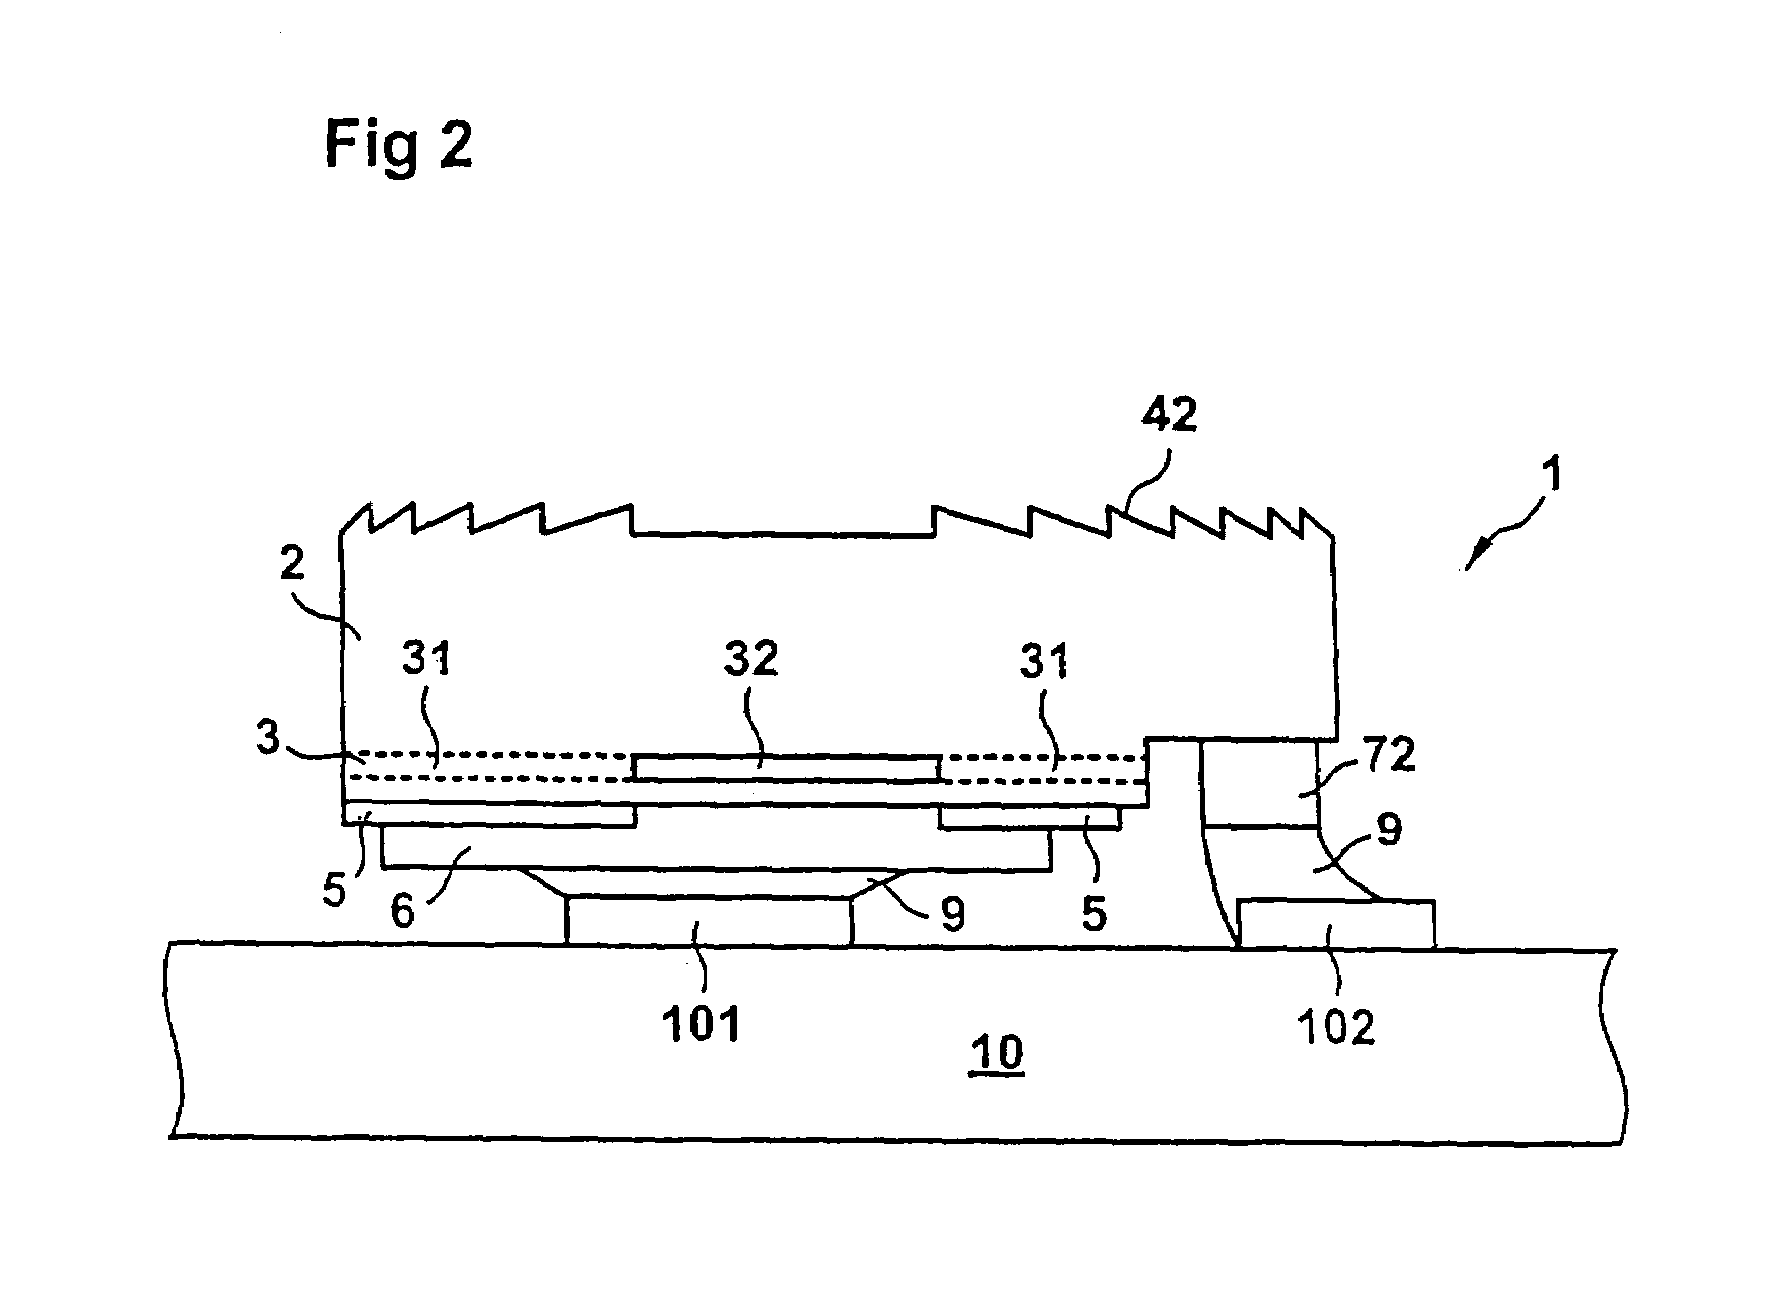 High radiance LED chip and a method for producing same